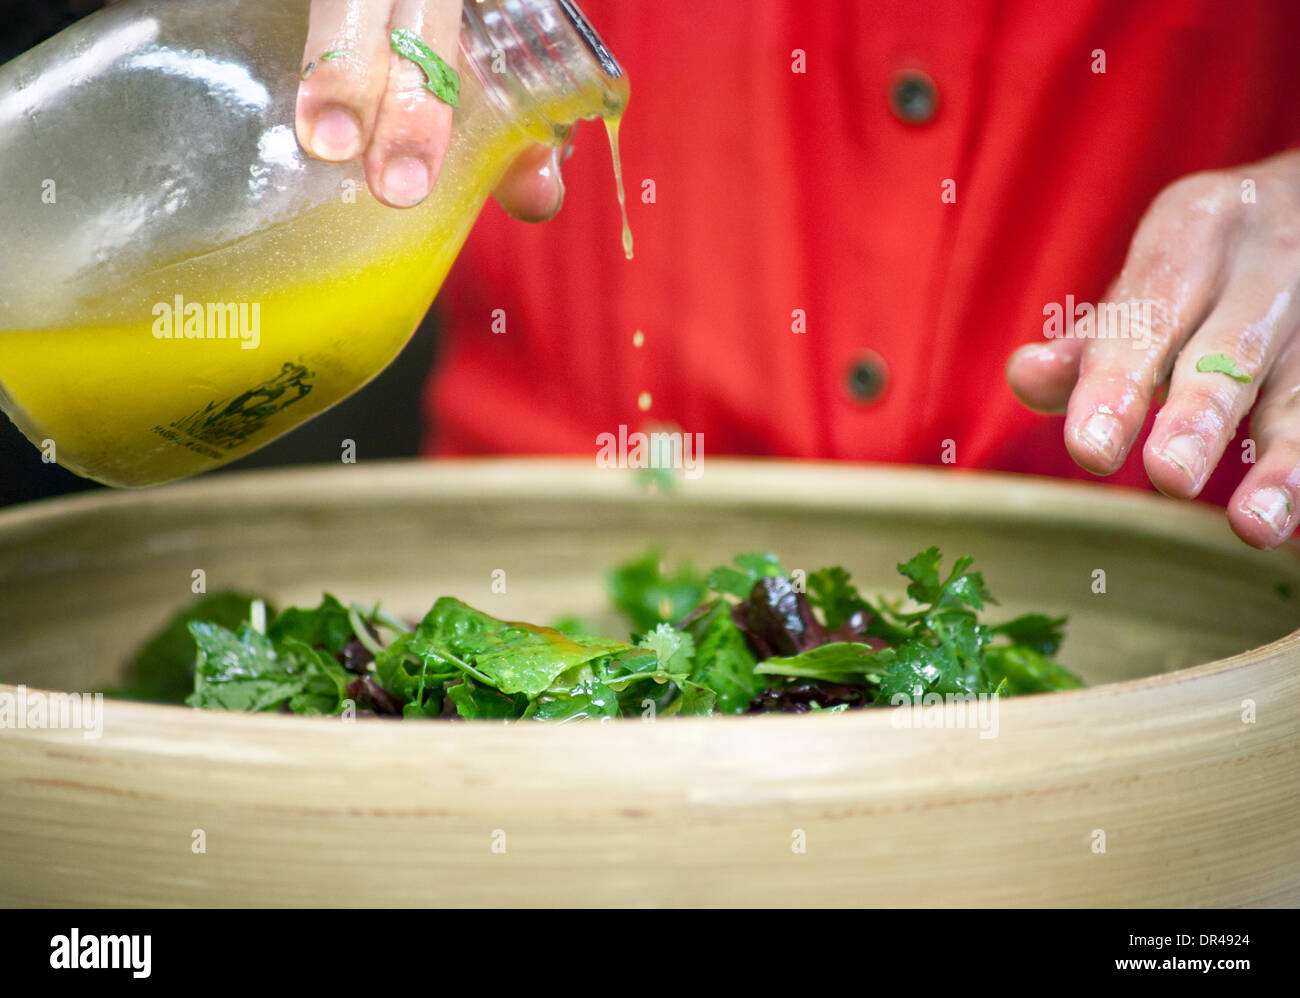 Dressing being poured over a salad Stock Photo